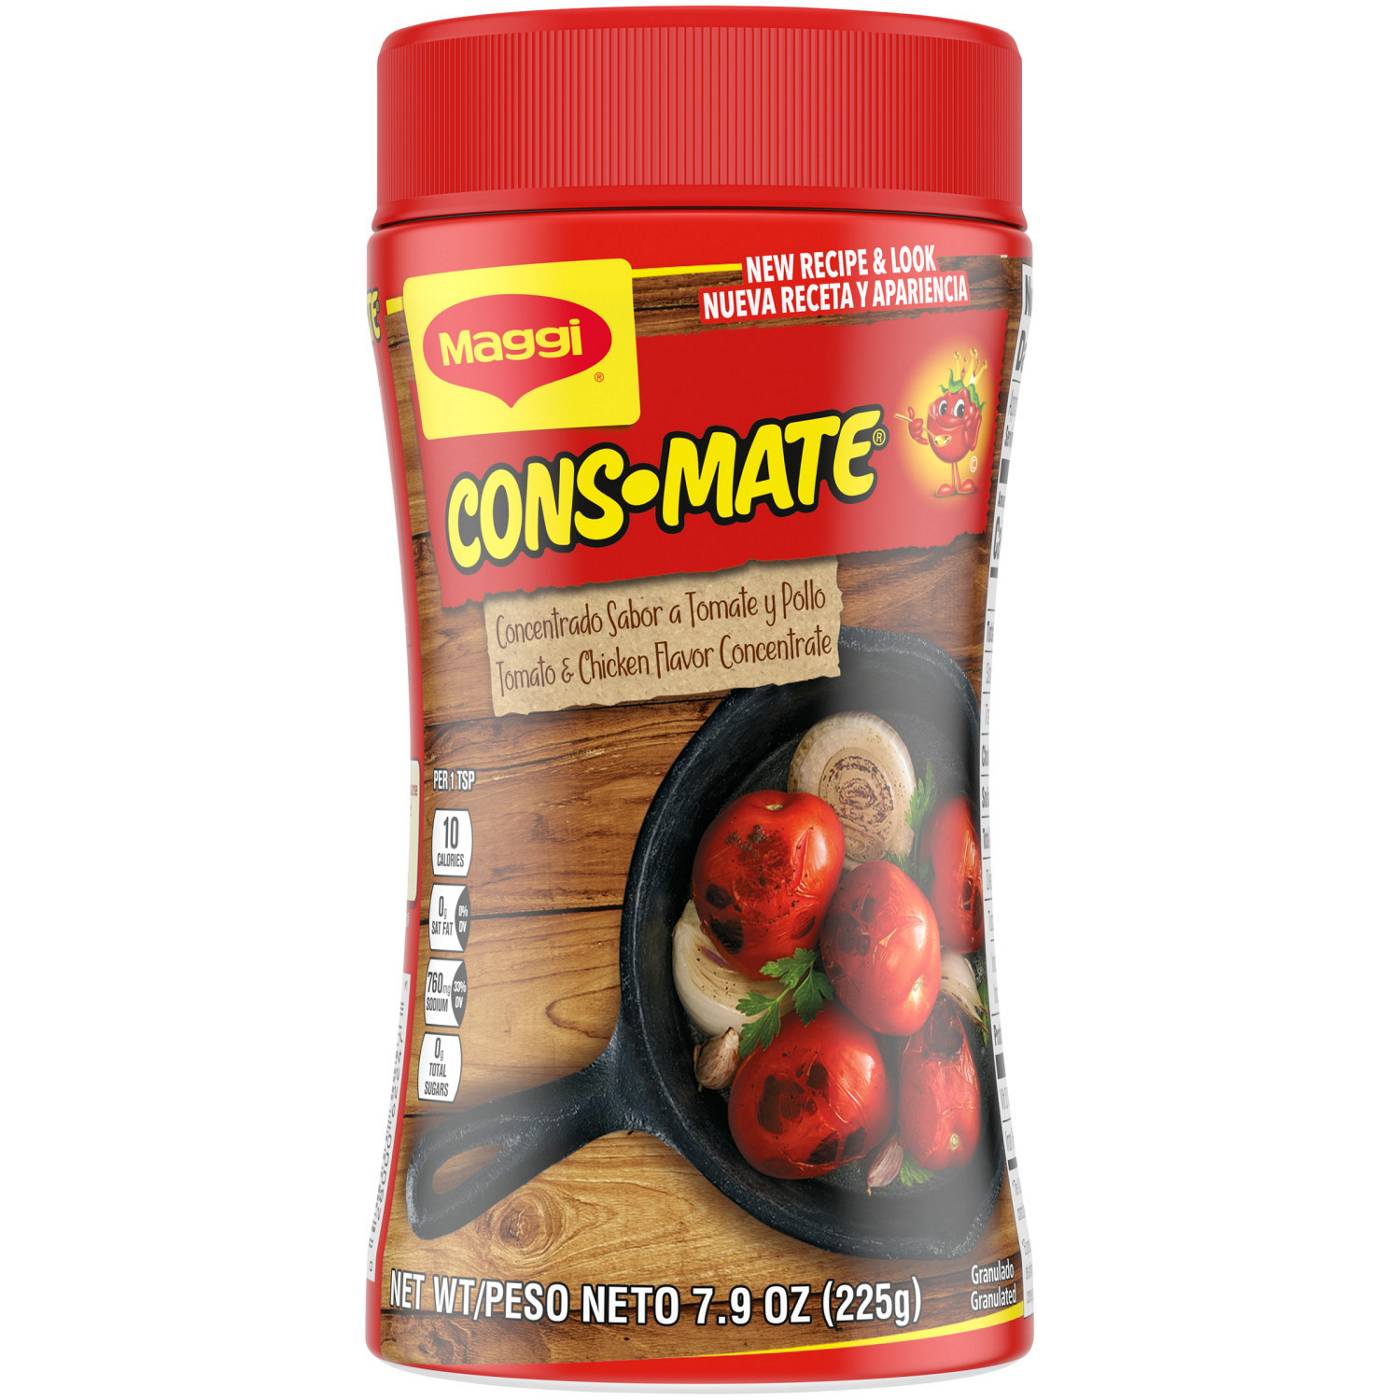 Consomate Granulated Tomato and Chicken Flavor Concentrate; image 1 of 8